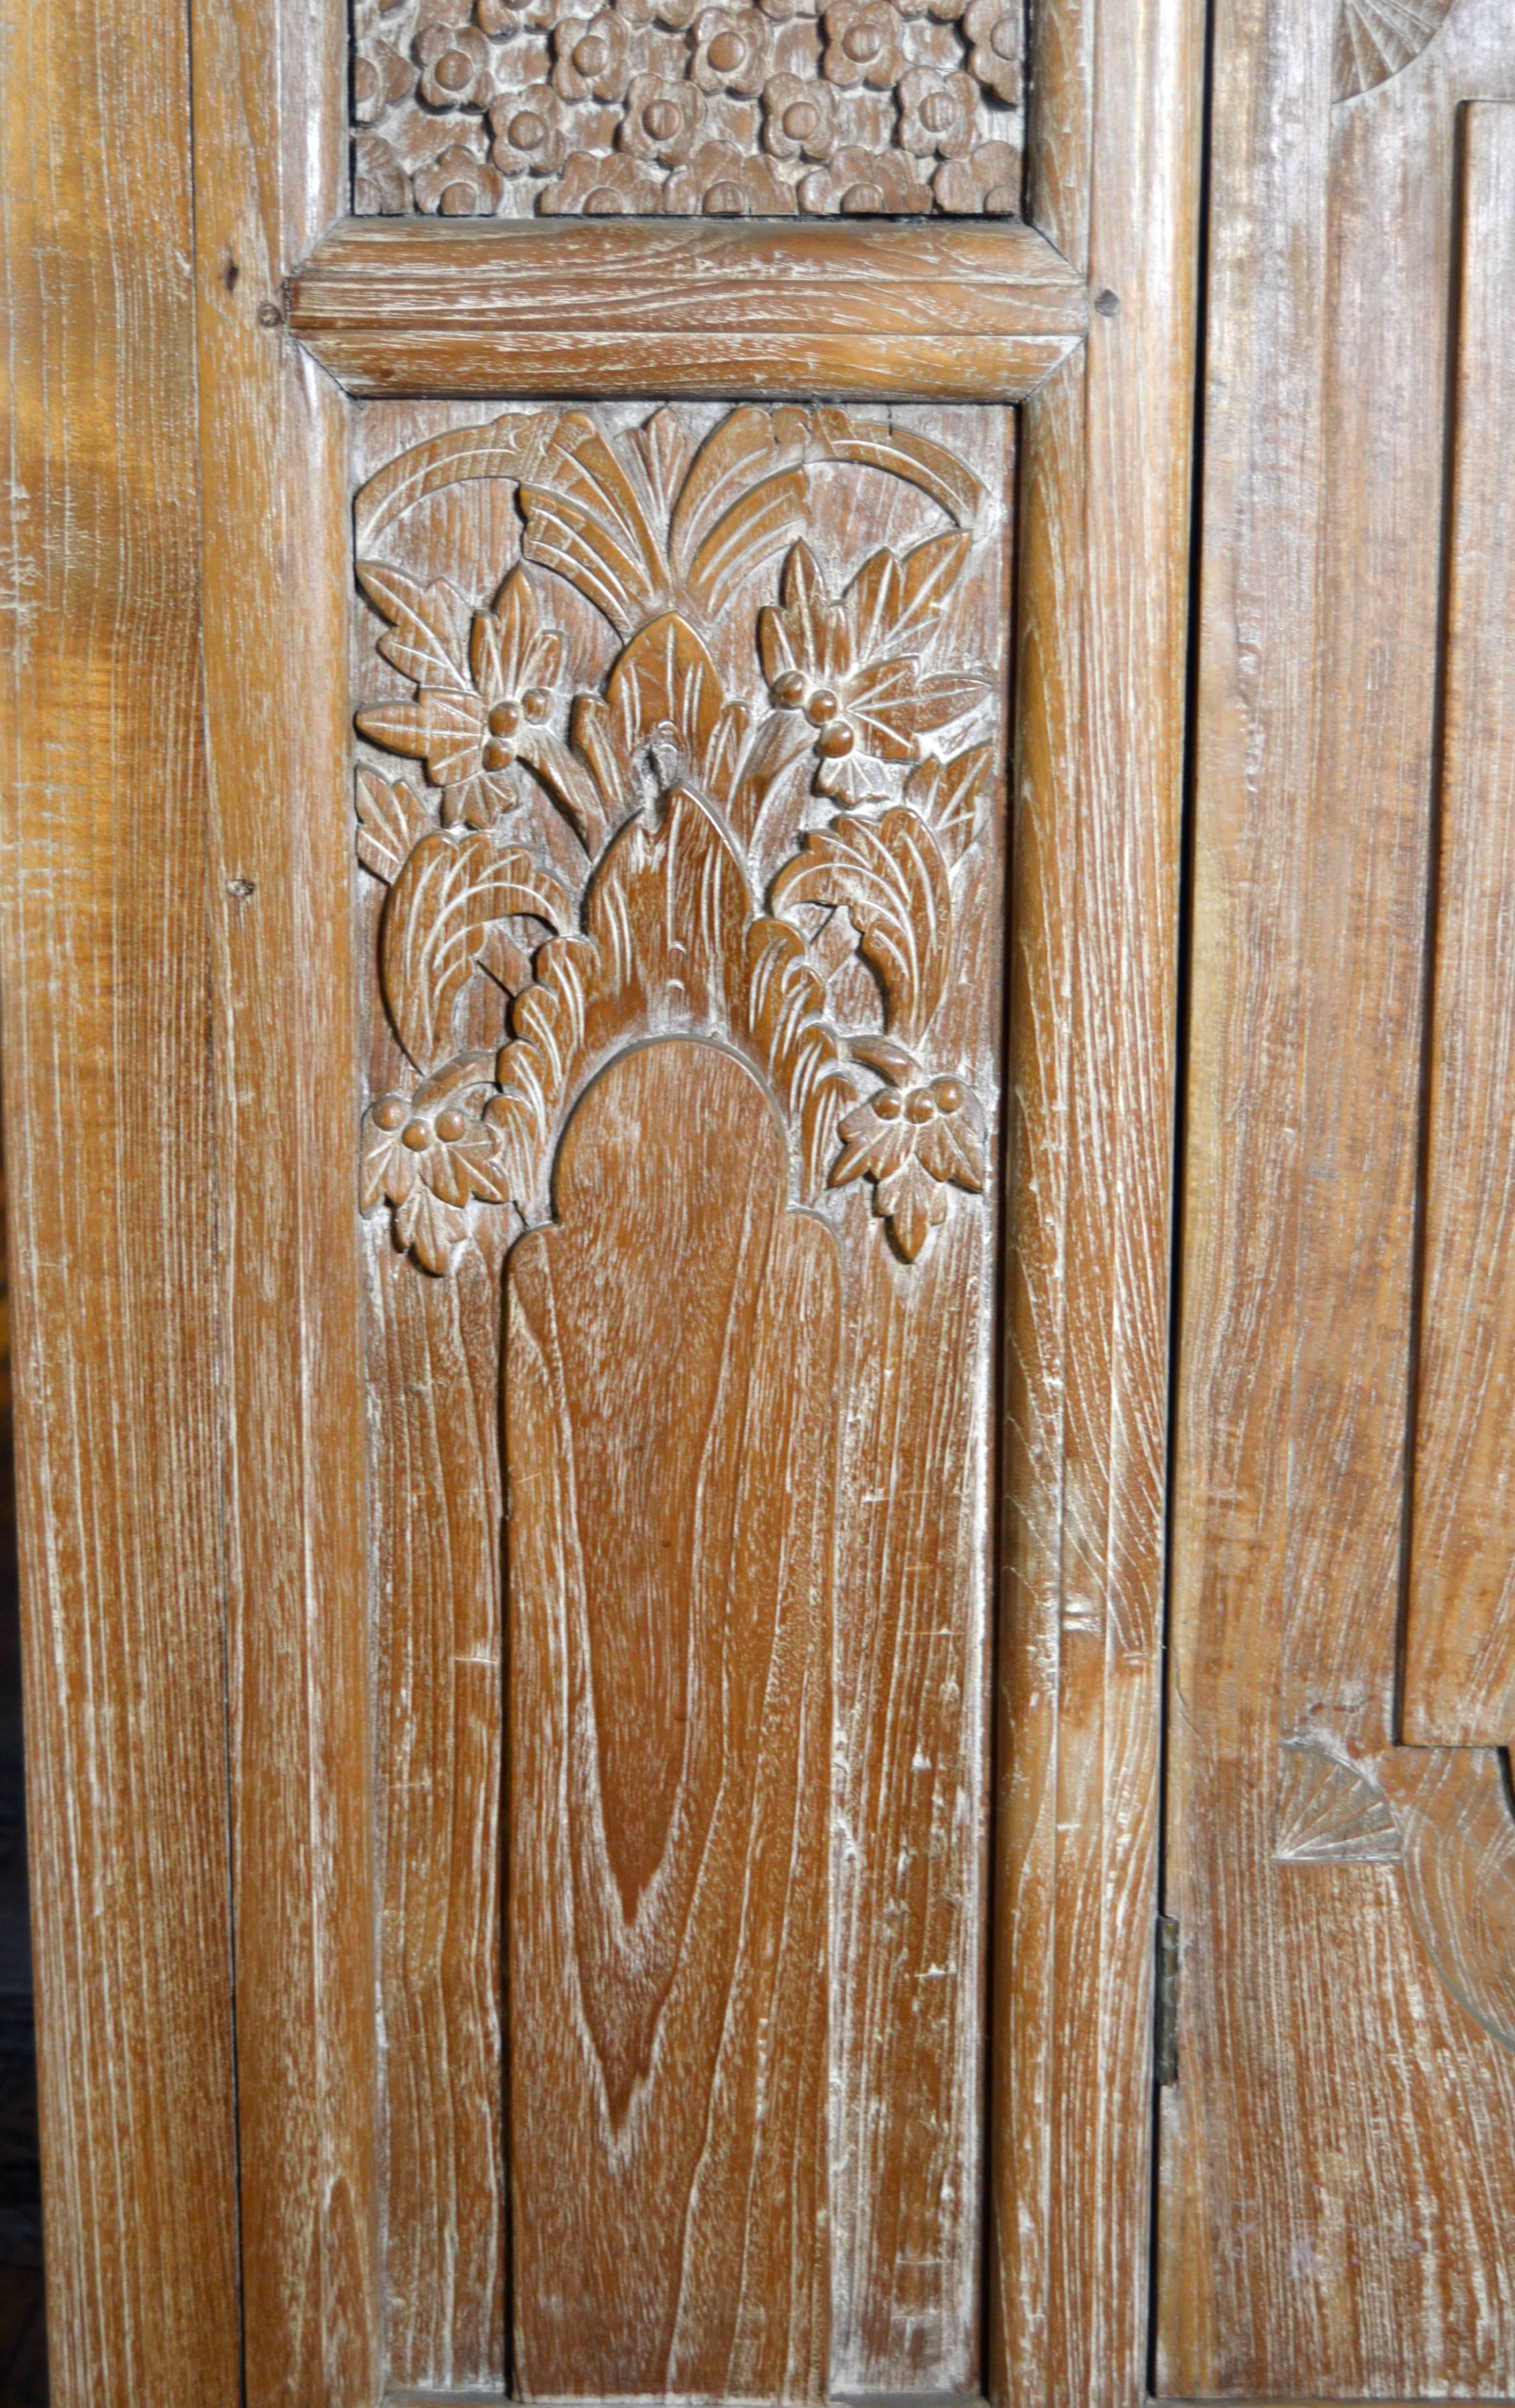 Indonesian Antique Hand-Carved White Washed Teak Cabinet with Scrollwork and Paneled Doors